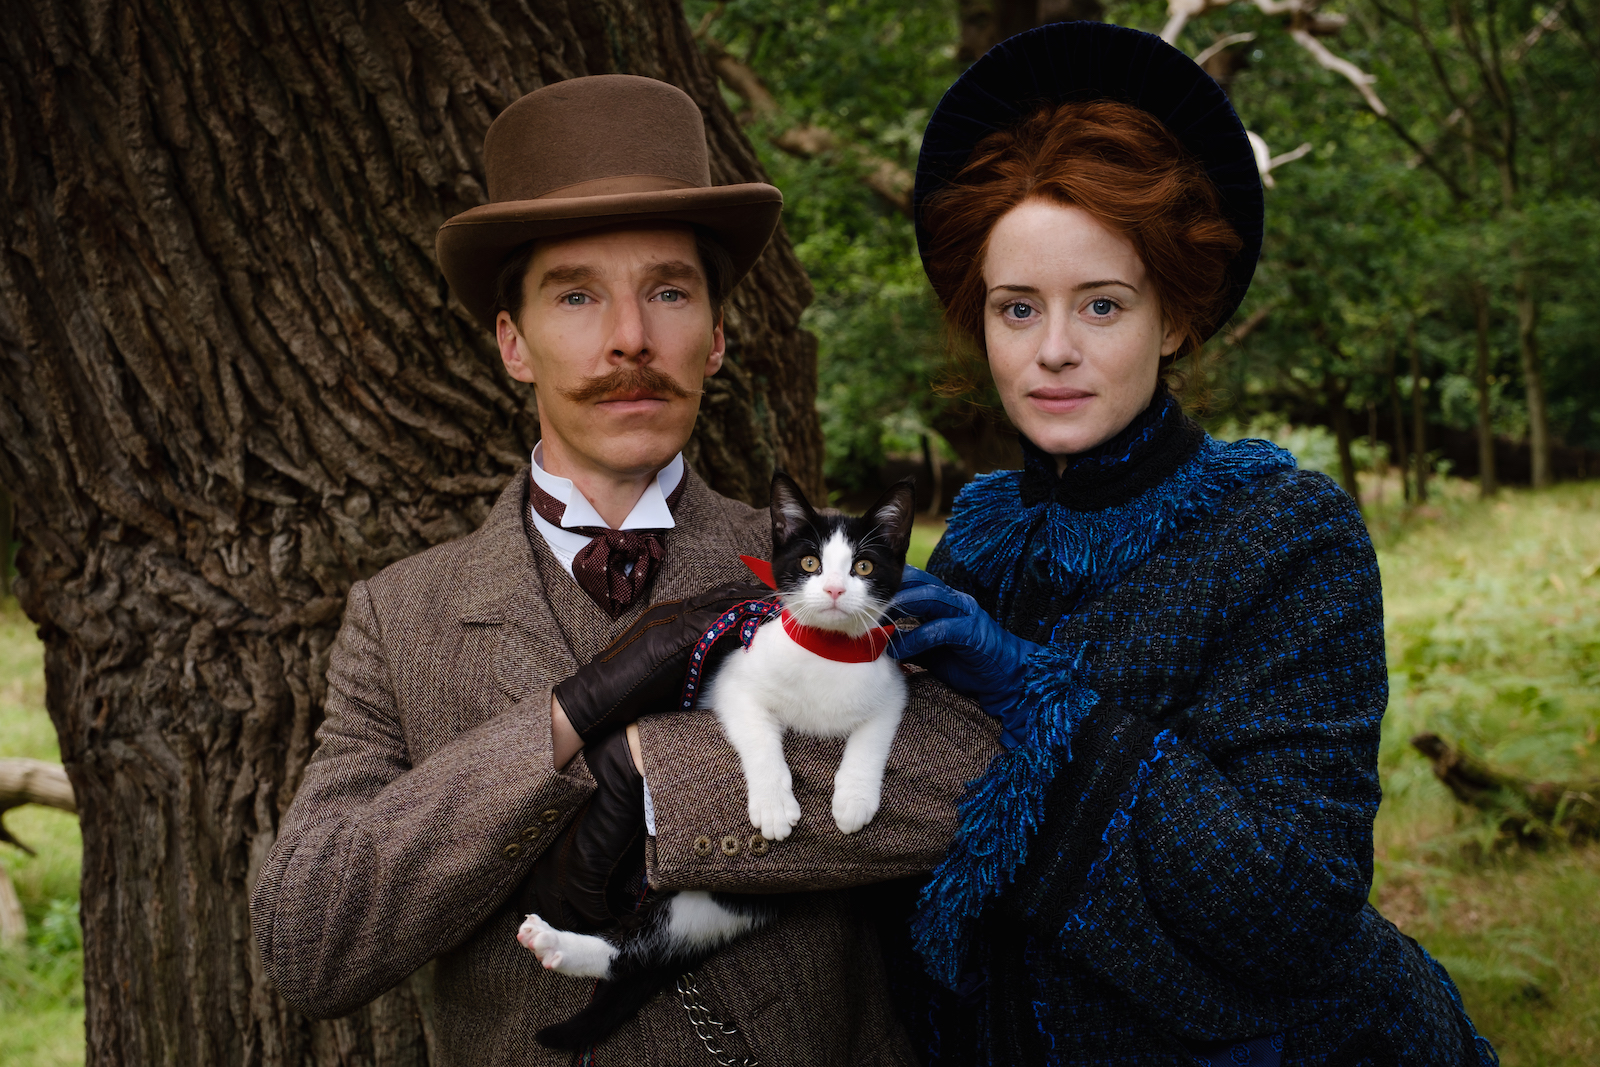 The Electrical Life of Louis Wain, starring Benedict Cumberbatch and Clai.....